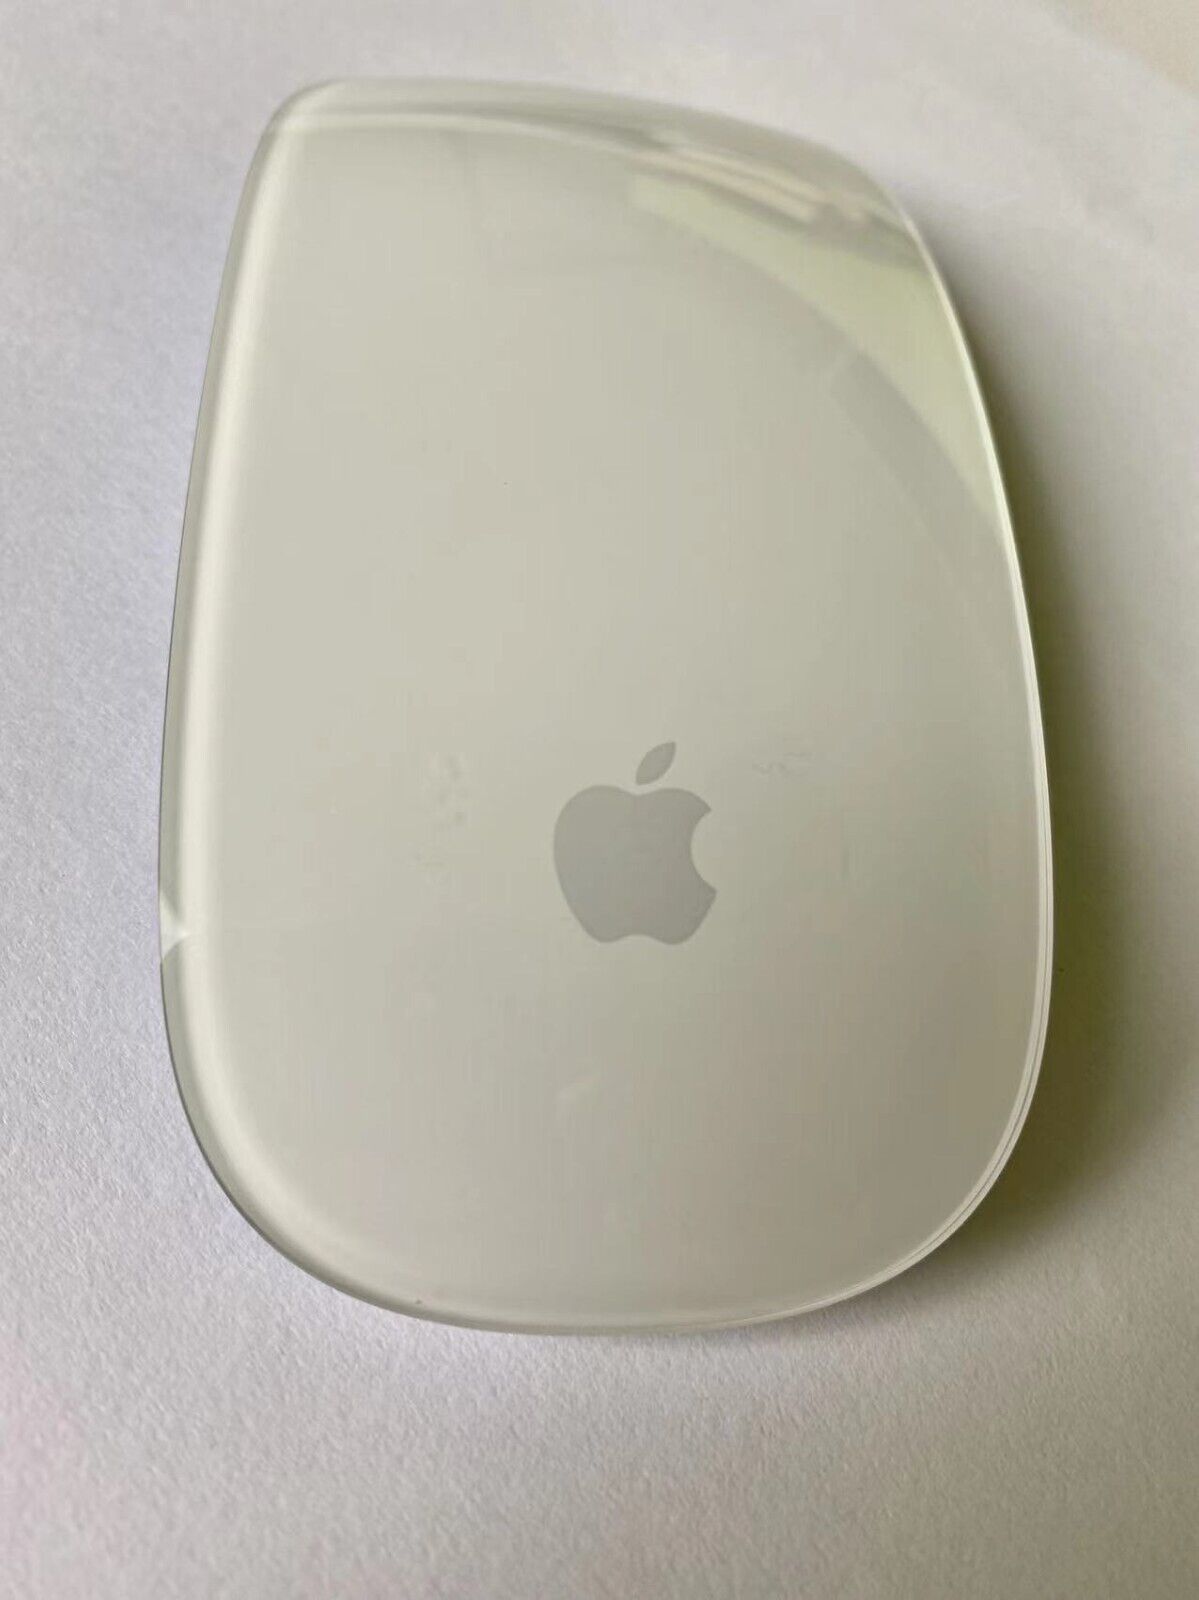 Apple Magic Mouse Version 2 A1657 Bluetooth Wireless - MLA02LL/ NO CABLE Green